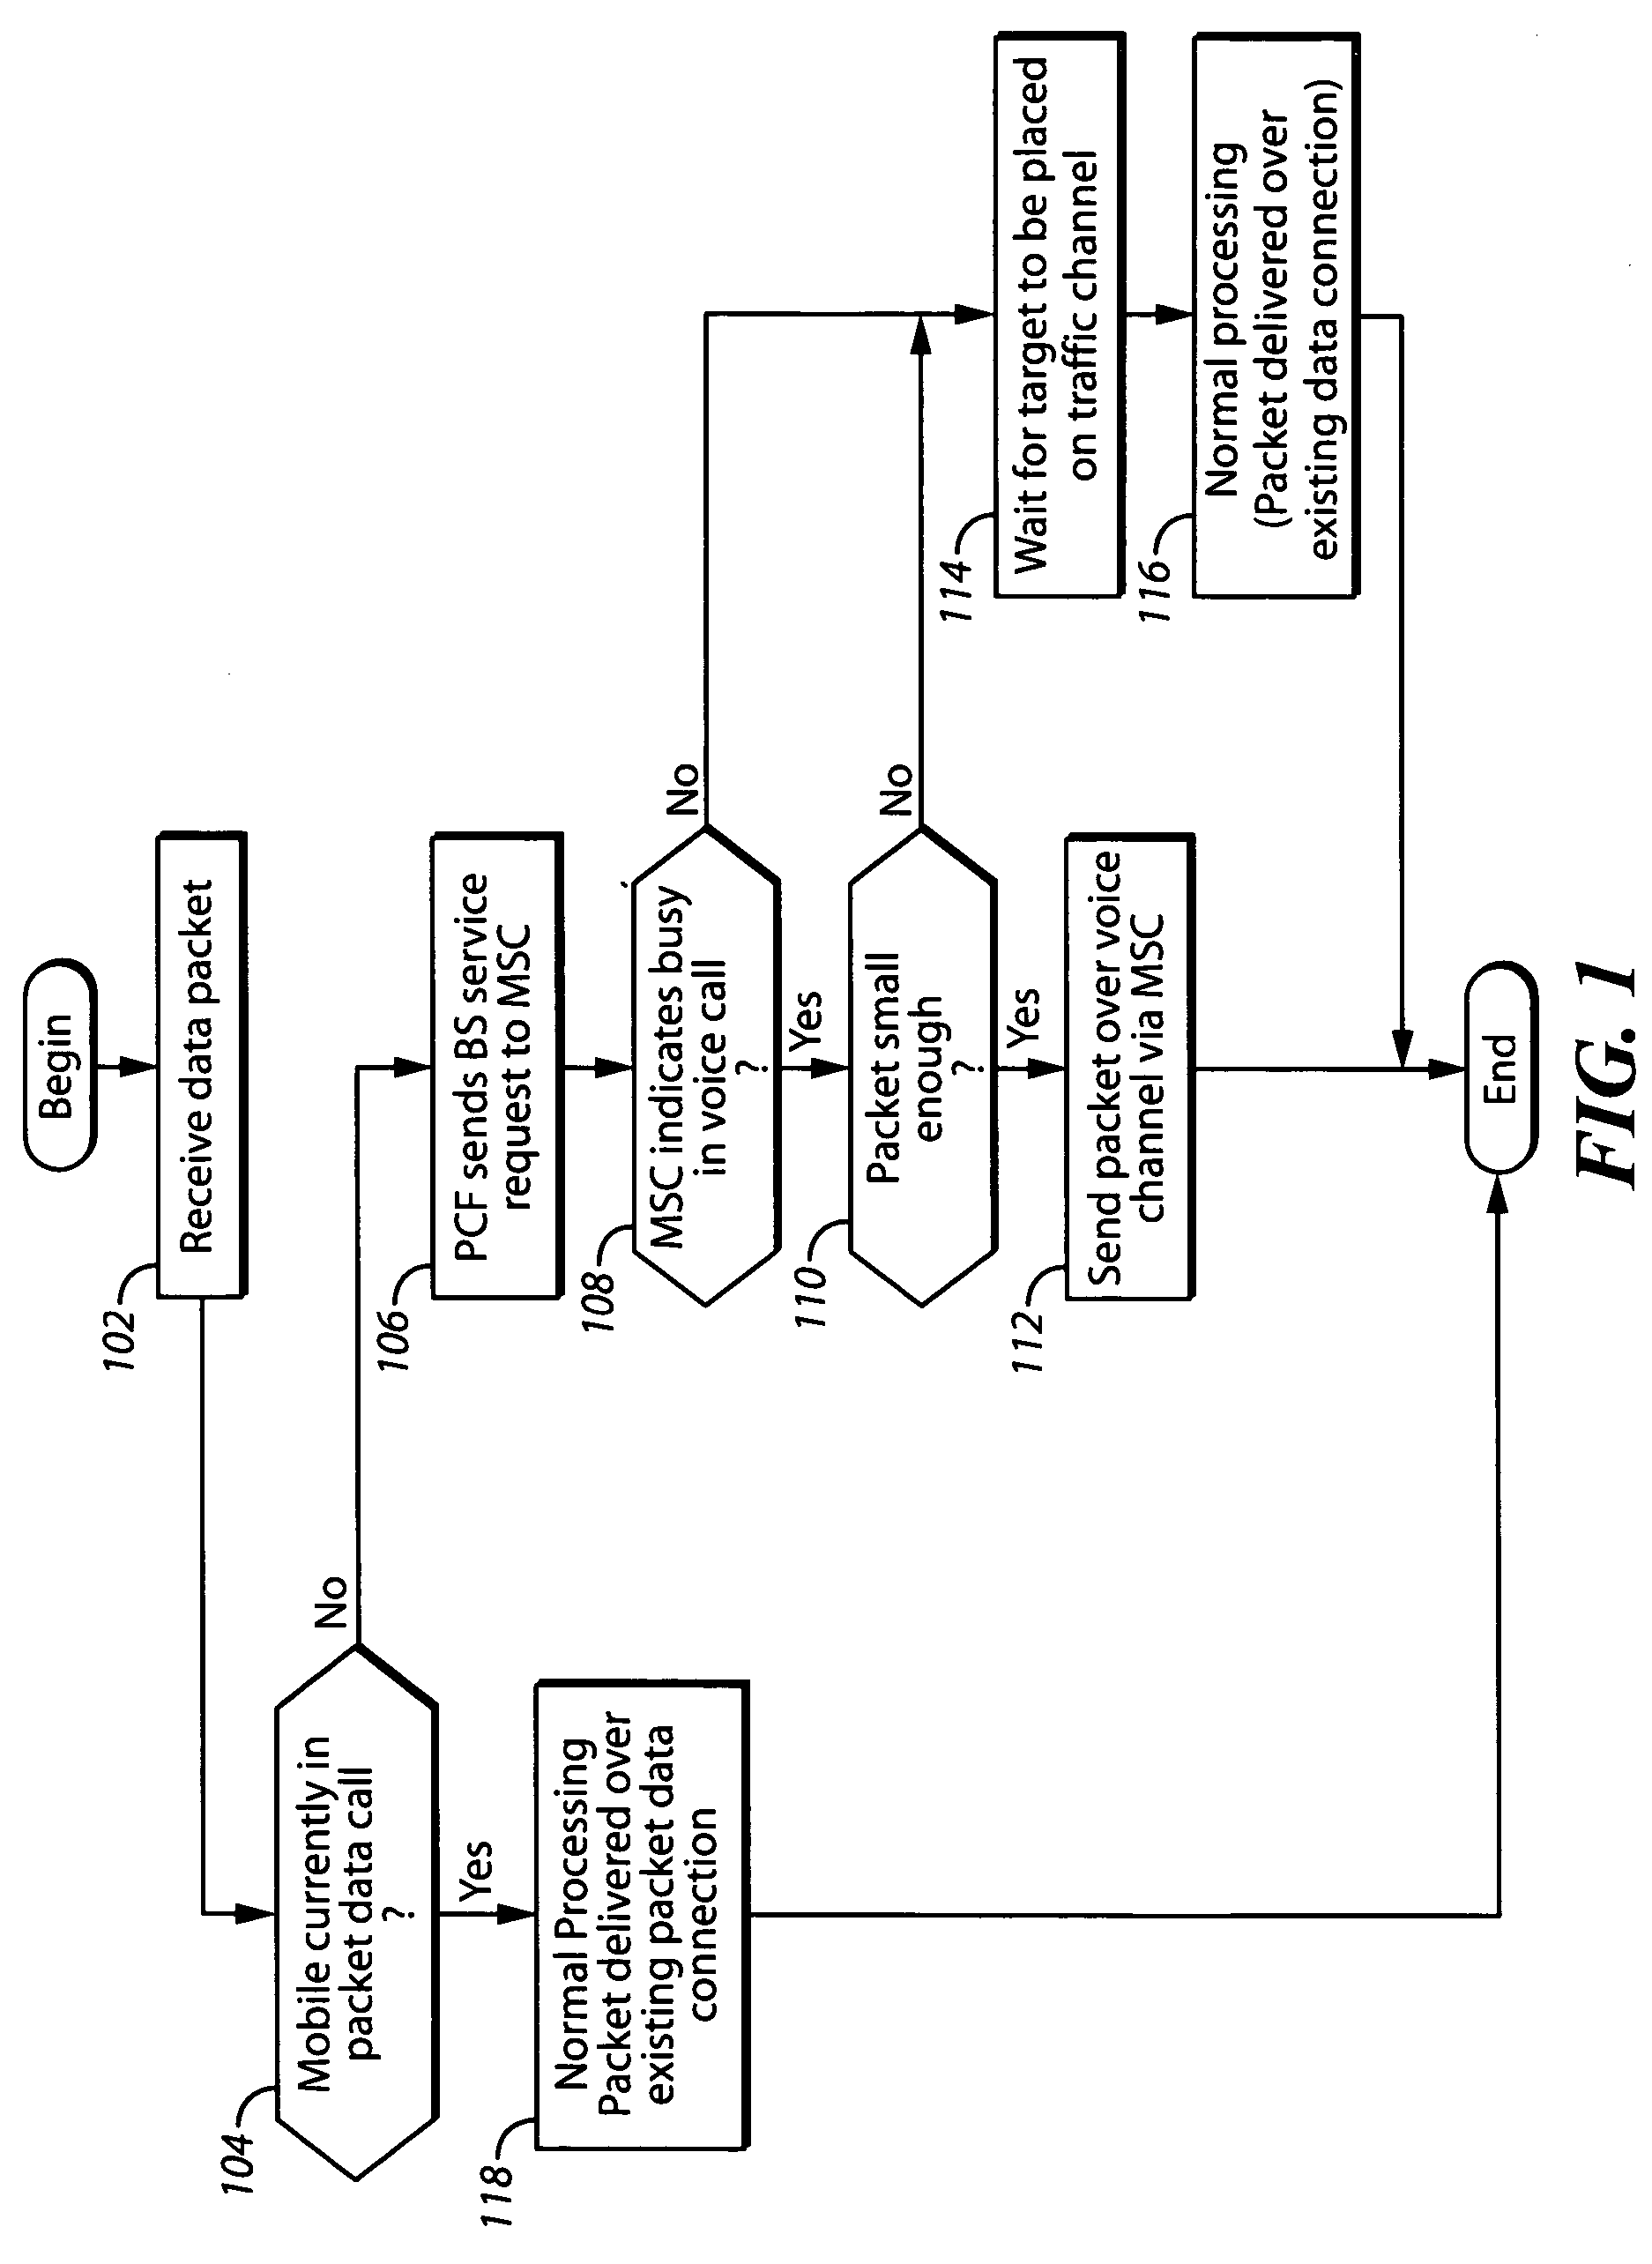 System and method for automatic rerouting of information when a target is busy